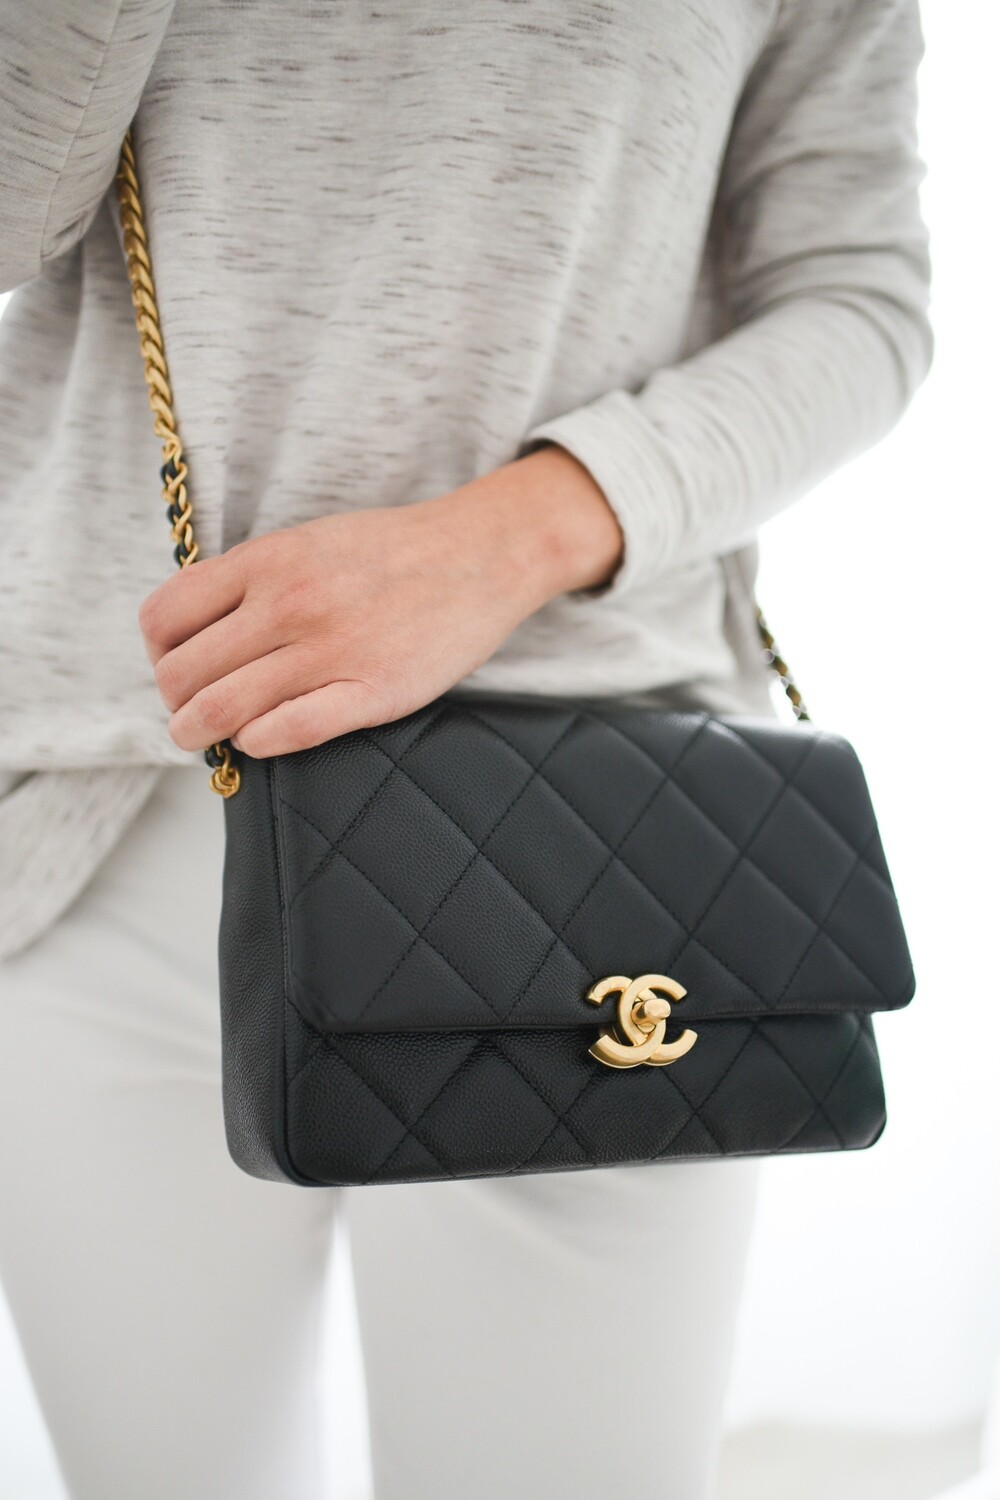 Chanel Melody Flap Small Black Caviar Leather, Brushed Gold